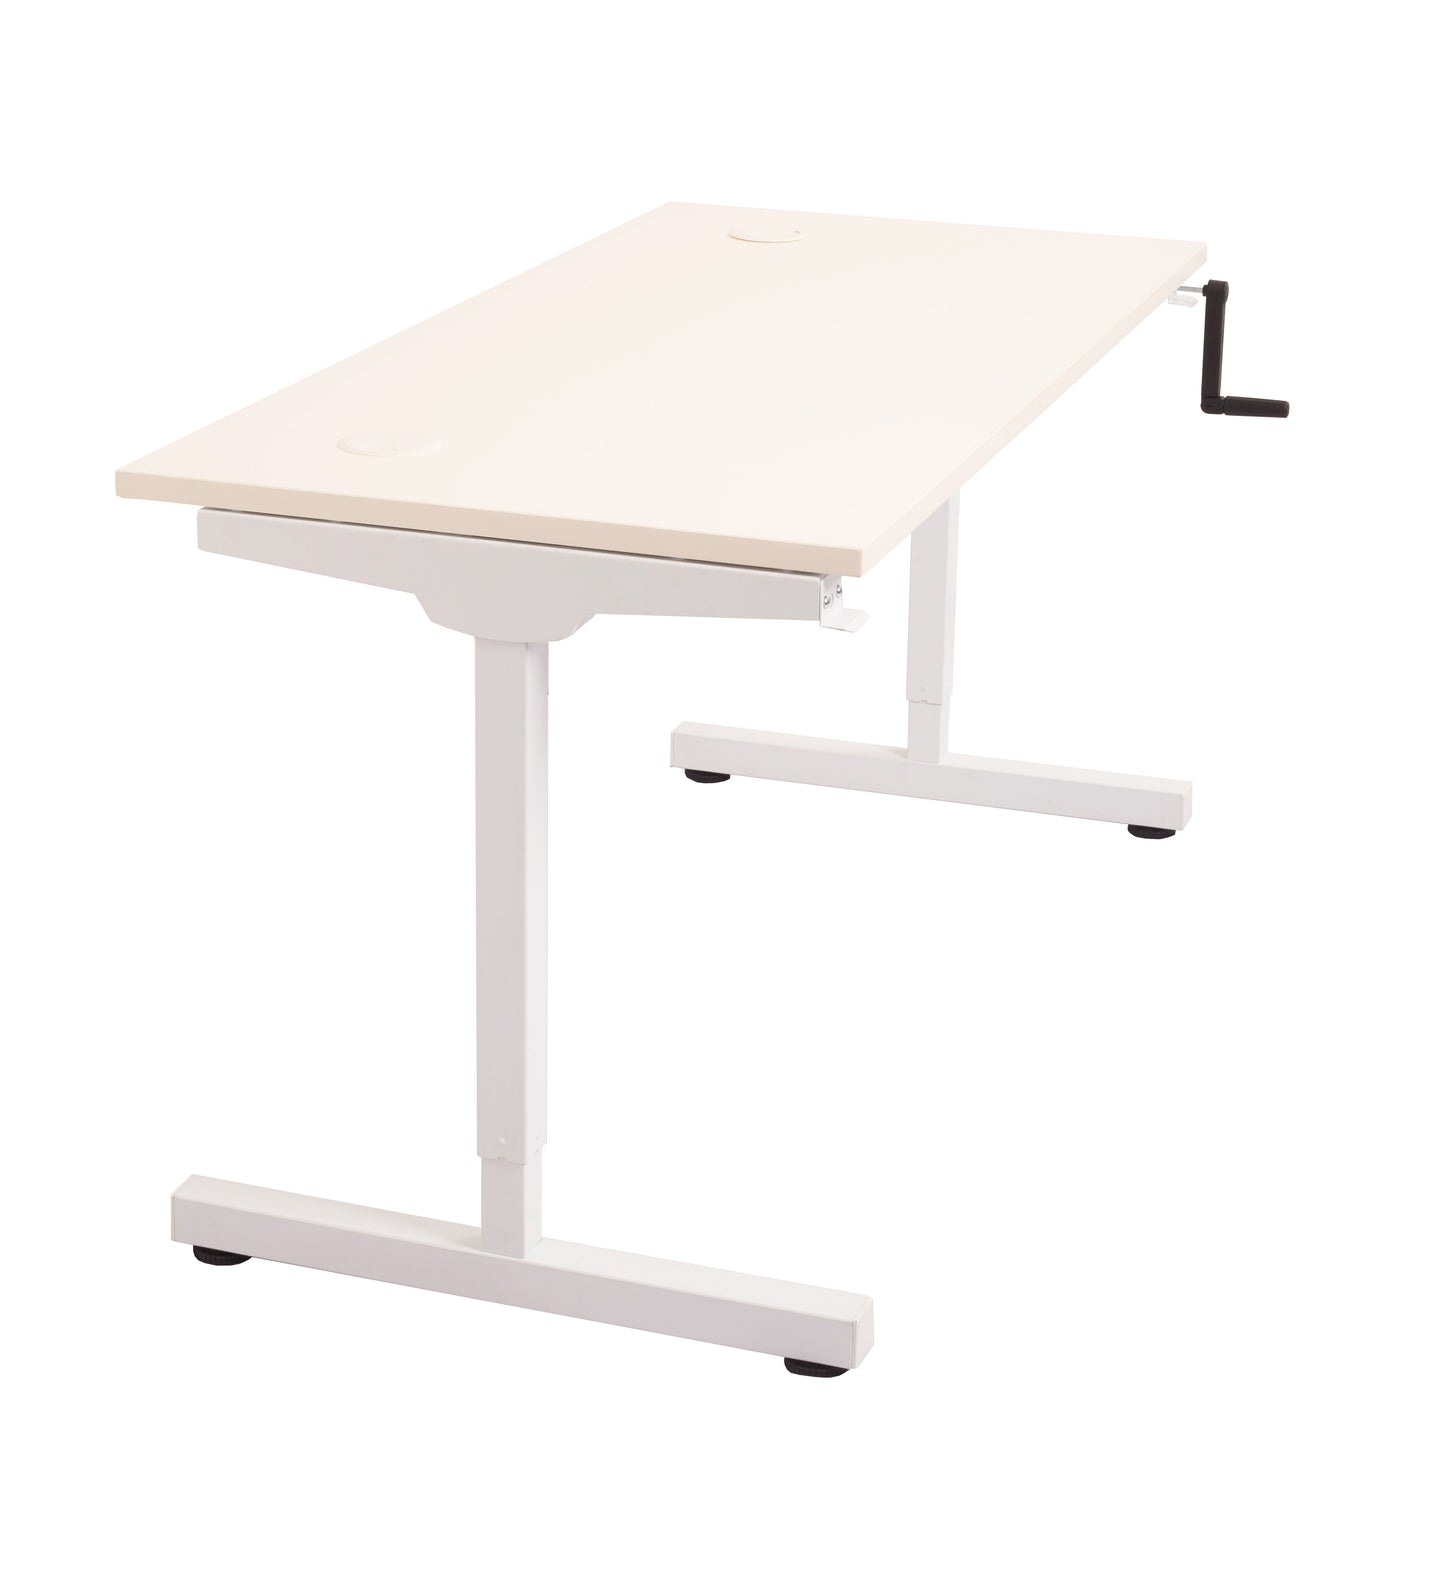 Buy Rapidline Triumph Manual Height Adjust Workstation FREE SHIPPING TMA127, TMA157, TMA187 standing desk white base 1200mm x 700mm, 1500mm x 700mm, 1800mm x 700mm natural white tabletop